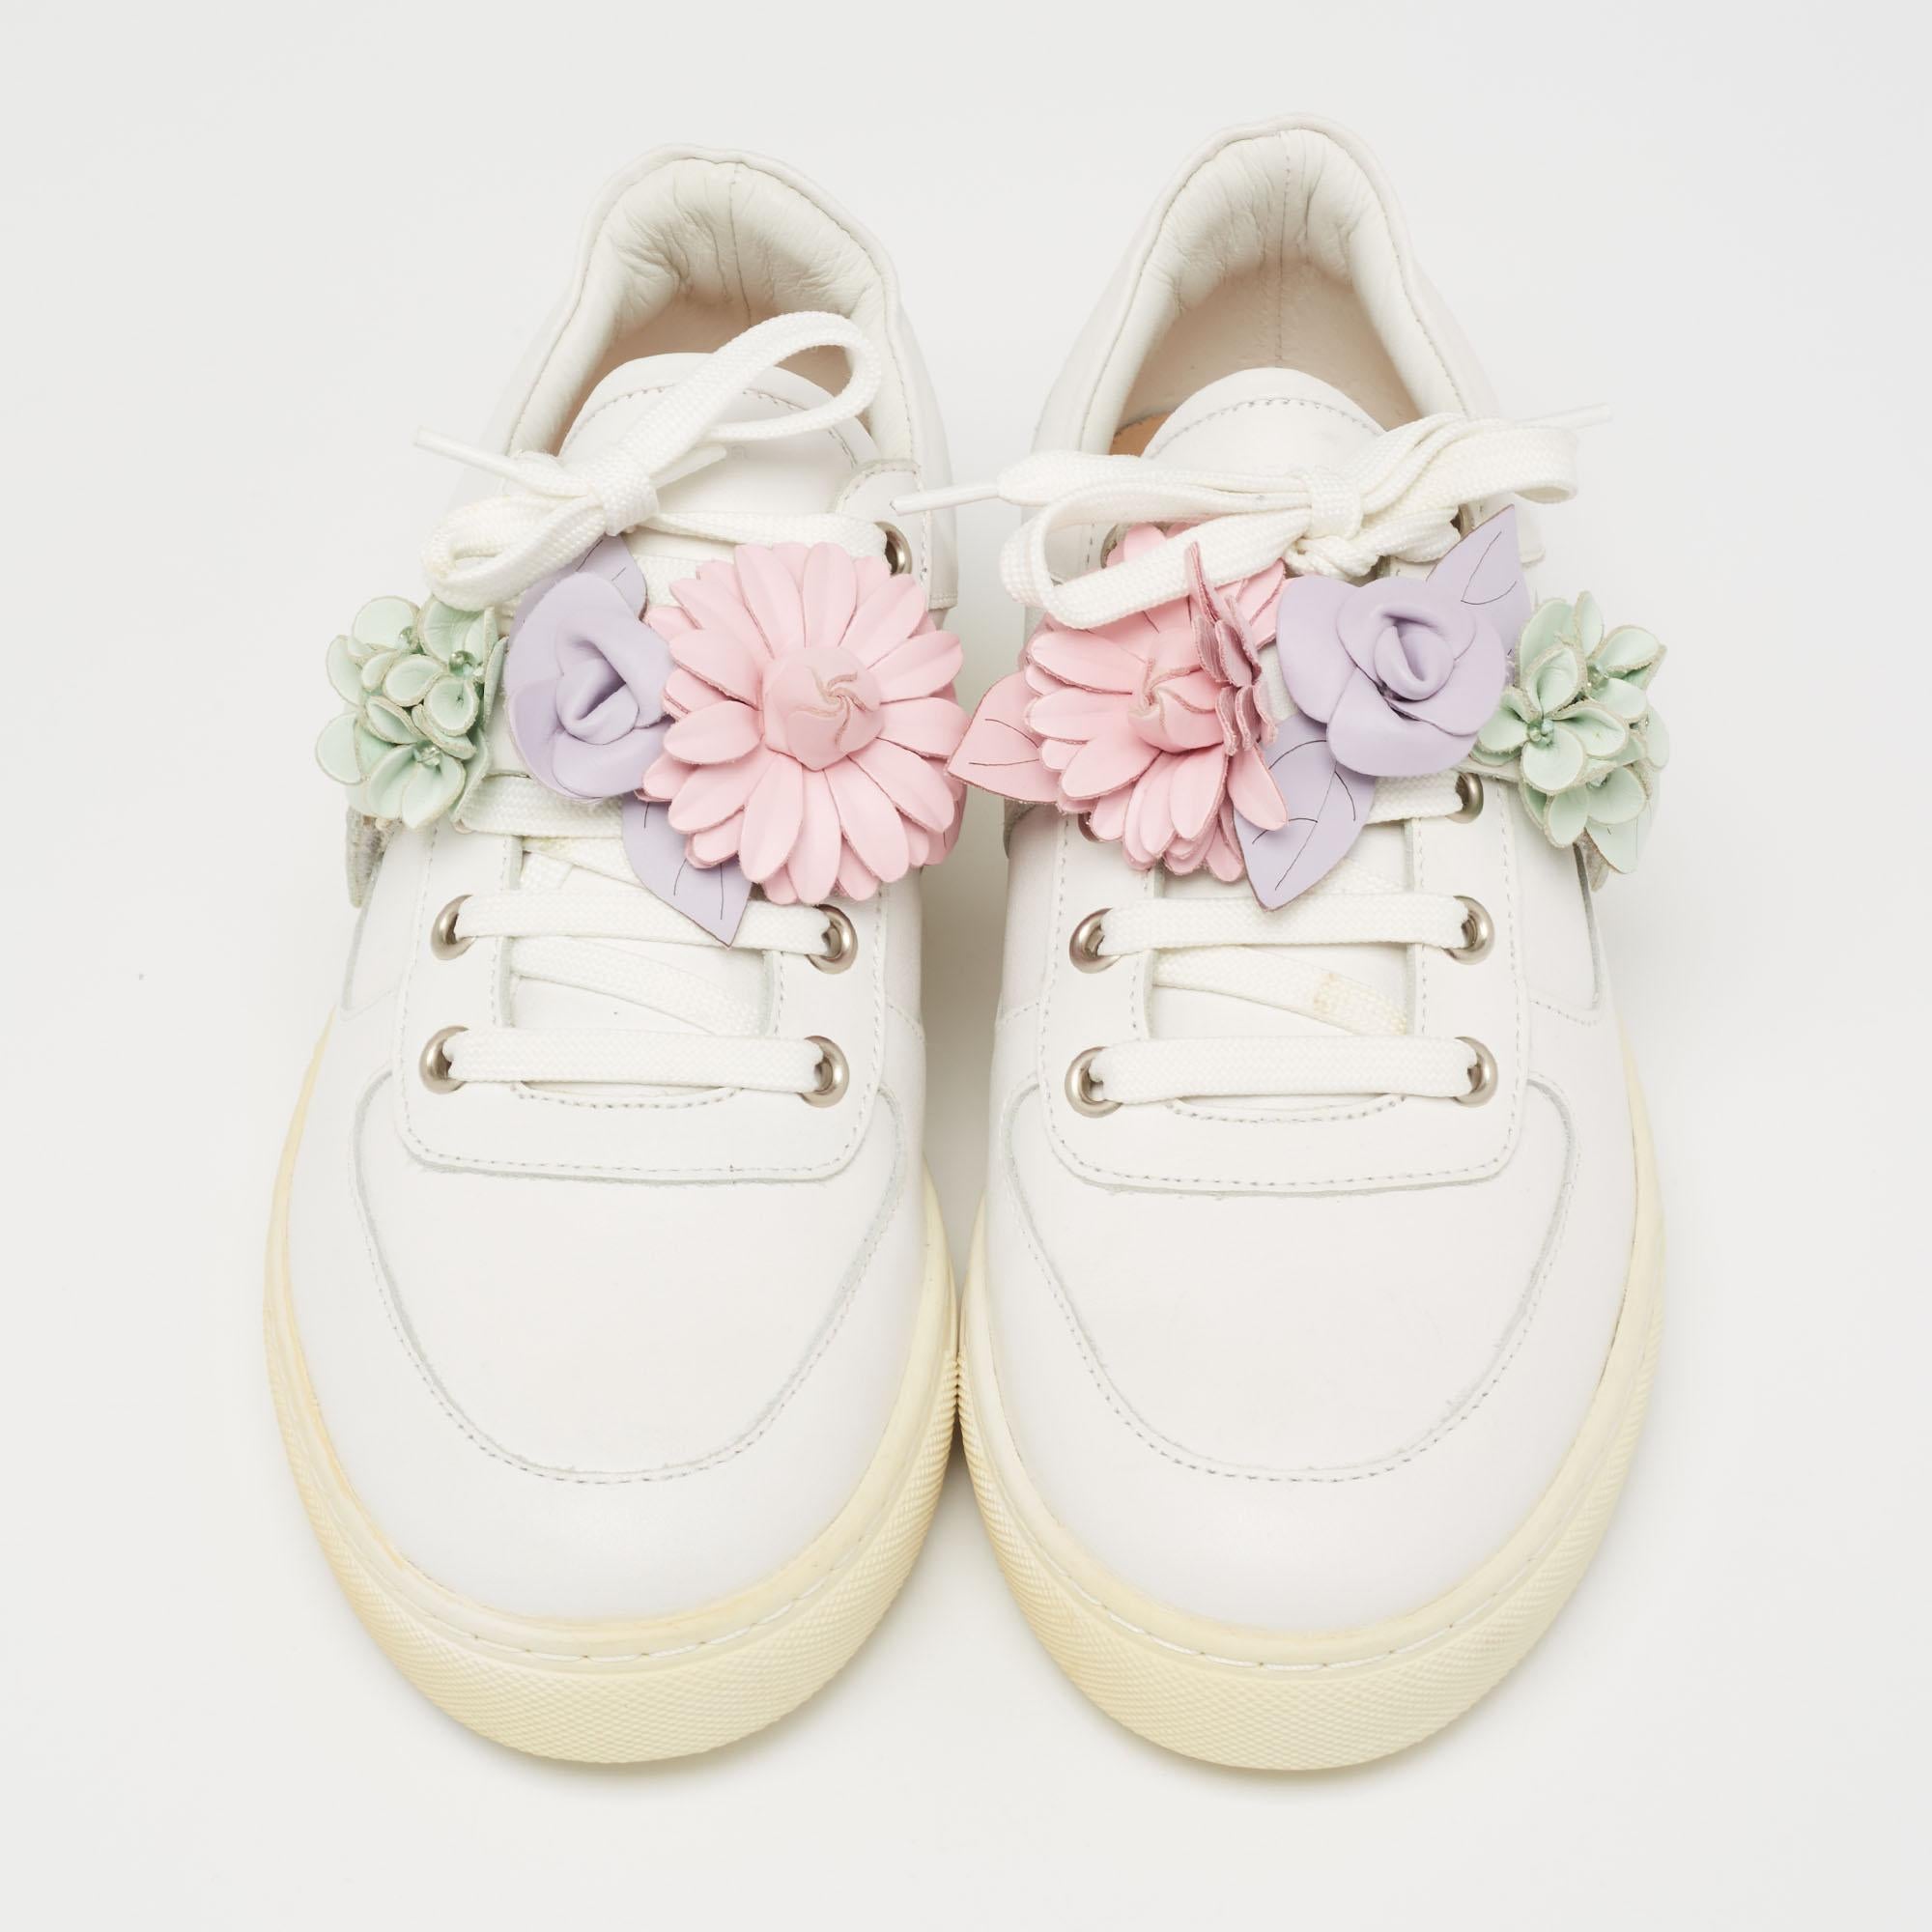 Sophia Webster has been a favorite worldwide for her unique, creative, and modern designs. She continues to charm us with these fabulous Lilico sneakers. These white sneakers are crafted from leather and feature round toes, and multicolored floral